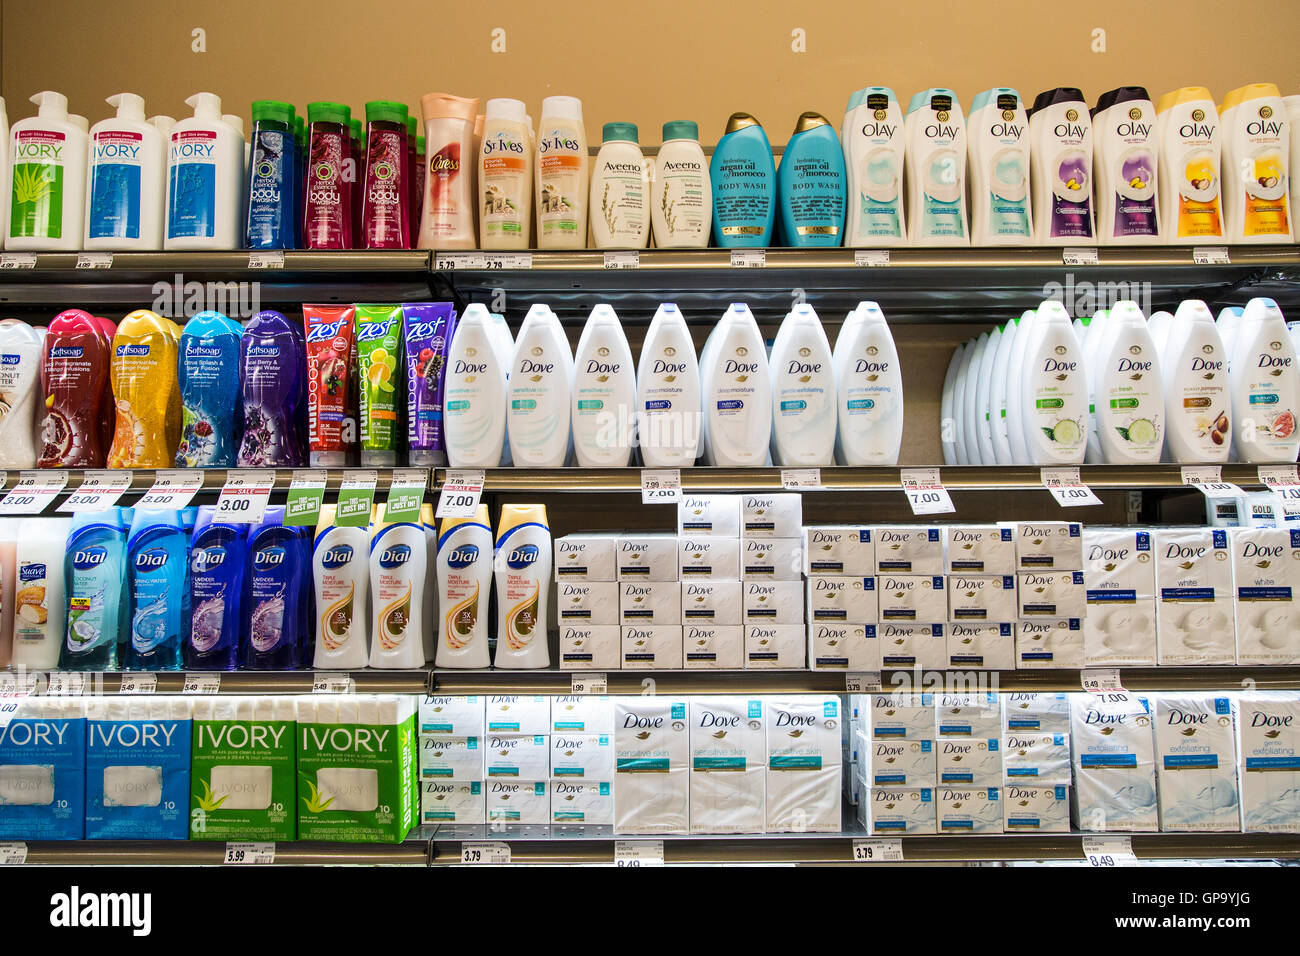 Shelves of brand name body wash and soap on display at a drugstore Stock Photo